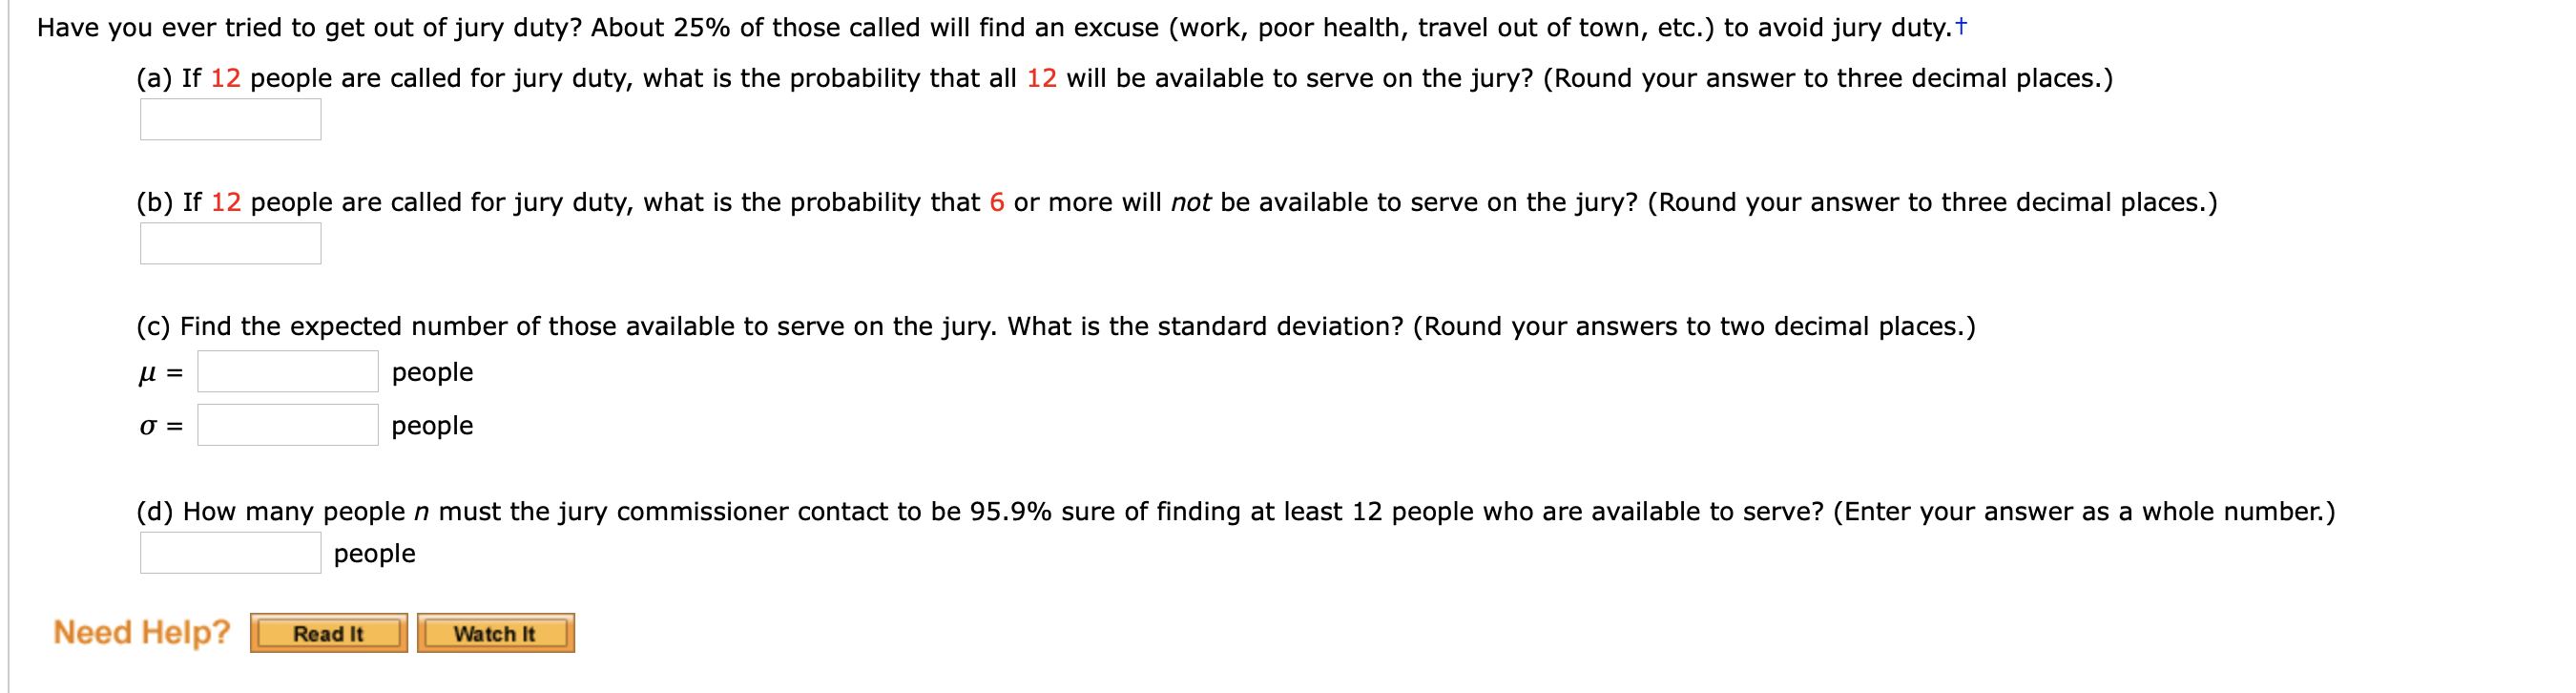 Have you ever tried to get out of jury duty? About 25% of those called will find an excuse (work, poor health, travel out of town, etc.) to avoid jury duty.t
(a) If 12 people are called for jury duty, what is the probability that all 12 will be available to serve on the jury? (Round your answer to three decimal places.)
(b) If 12 people are called for jury duty, what is the probability that 6 or more will not be available to serve on the jury? (Round your answer to three decimal places.)
(c) Find the expected number of those available to serve on the jury. What is the standard deviation? (Round your answers to two decimal places.)
people
и -
people
=
(d) How many people n must the jury commissioner contact to be 95.9% sure of finding at least 12 people who are available to serve? (Enter your answer as a whole number.)
people
Need Help?
Read It
Watch It
